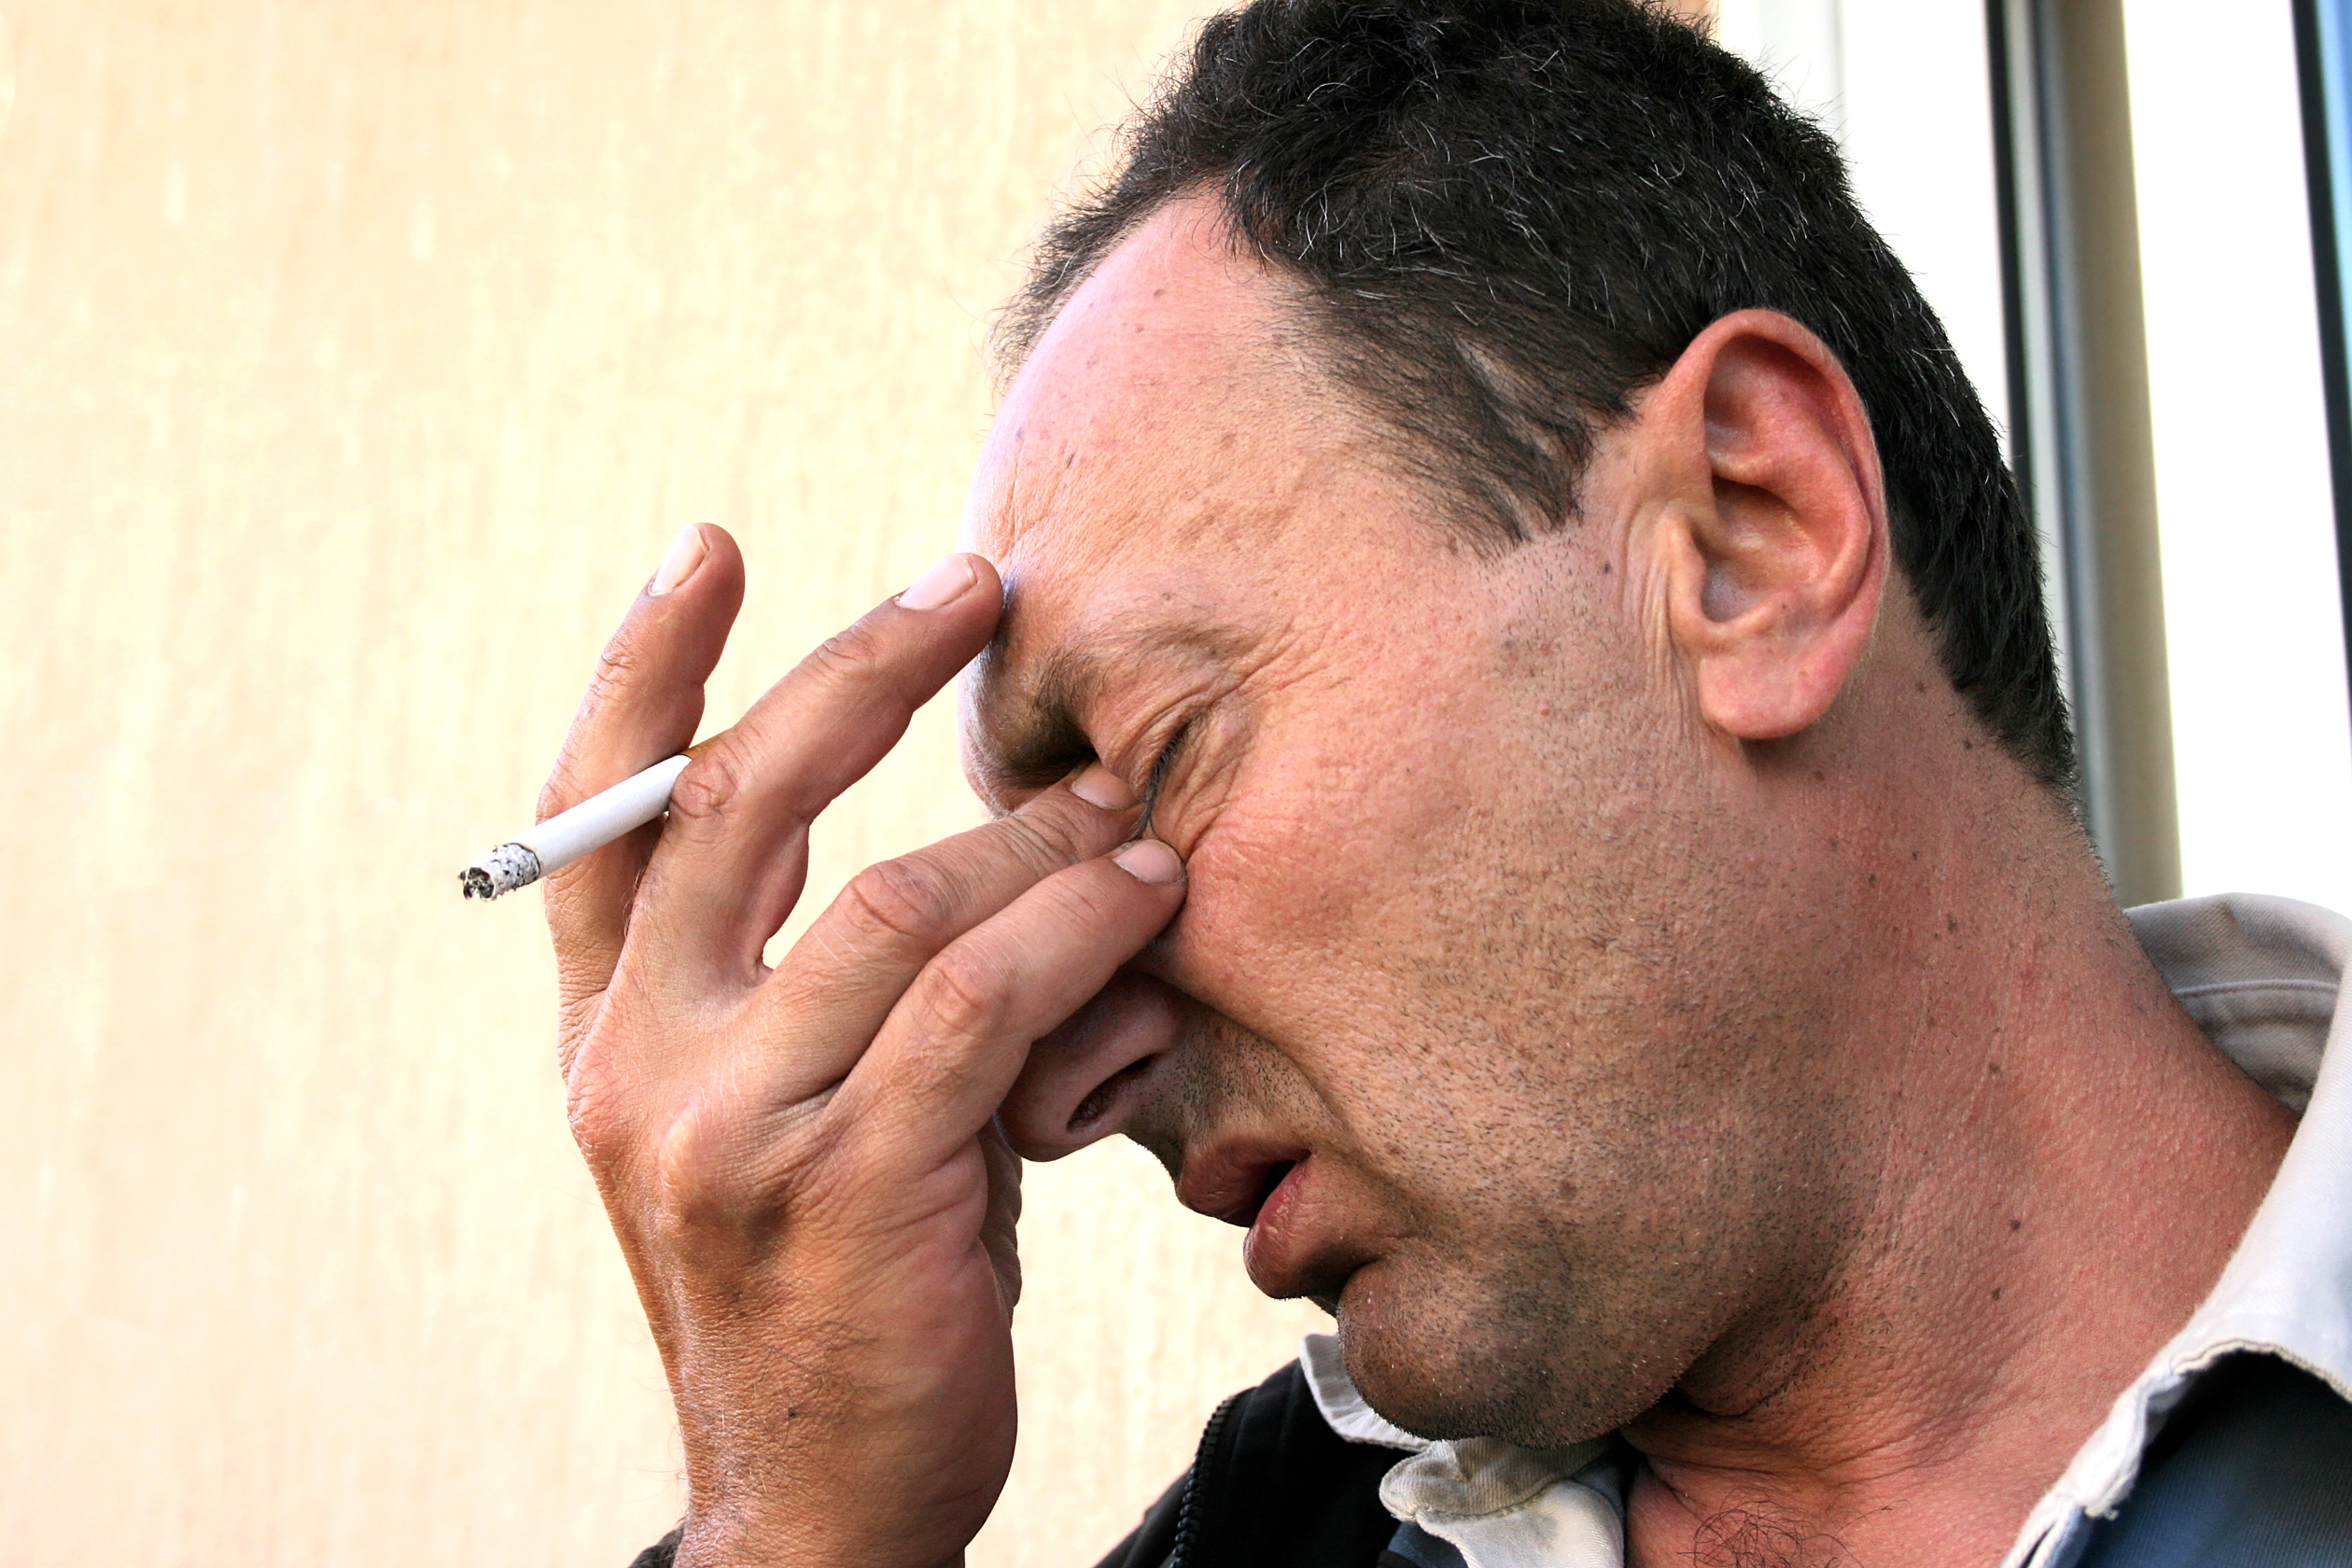 New Treatment Approach Could Help Depressed Smokers Quit